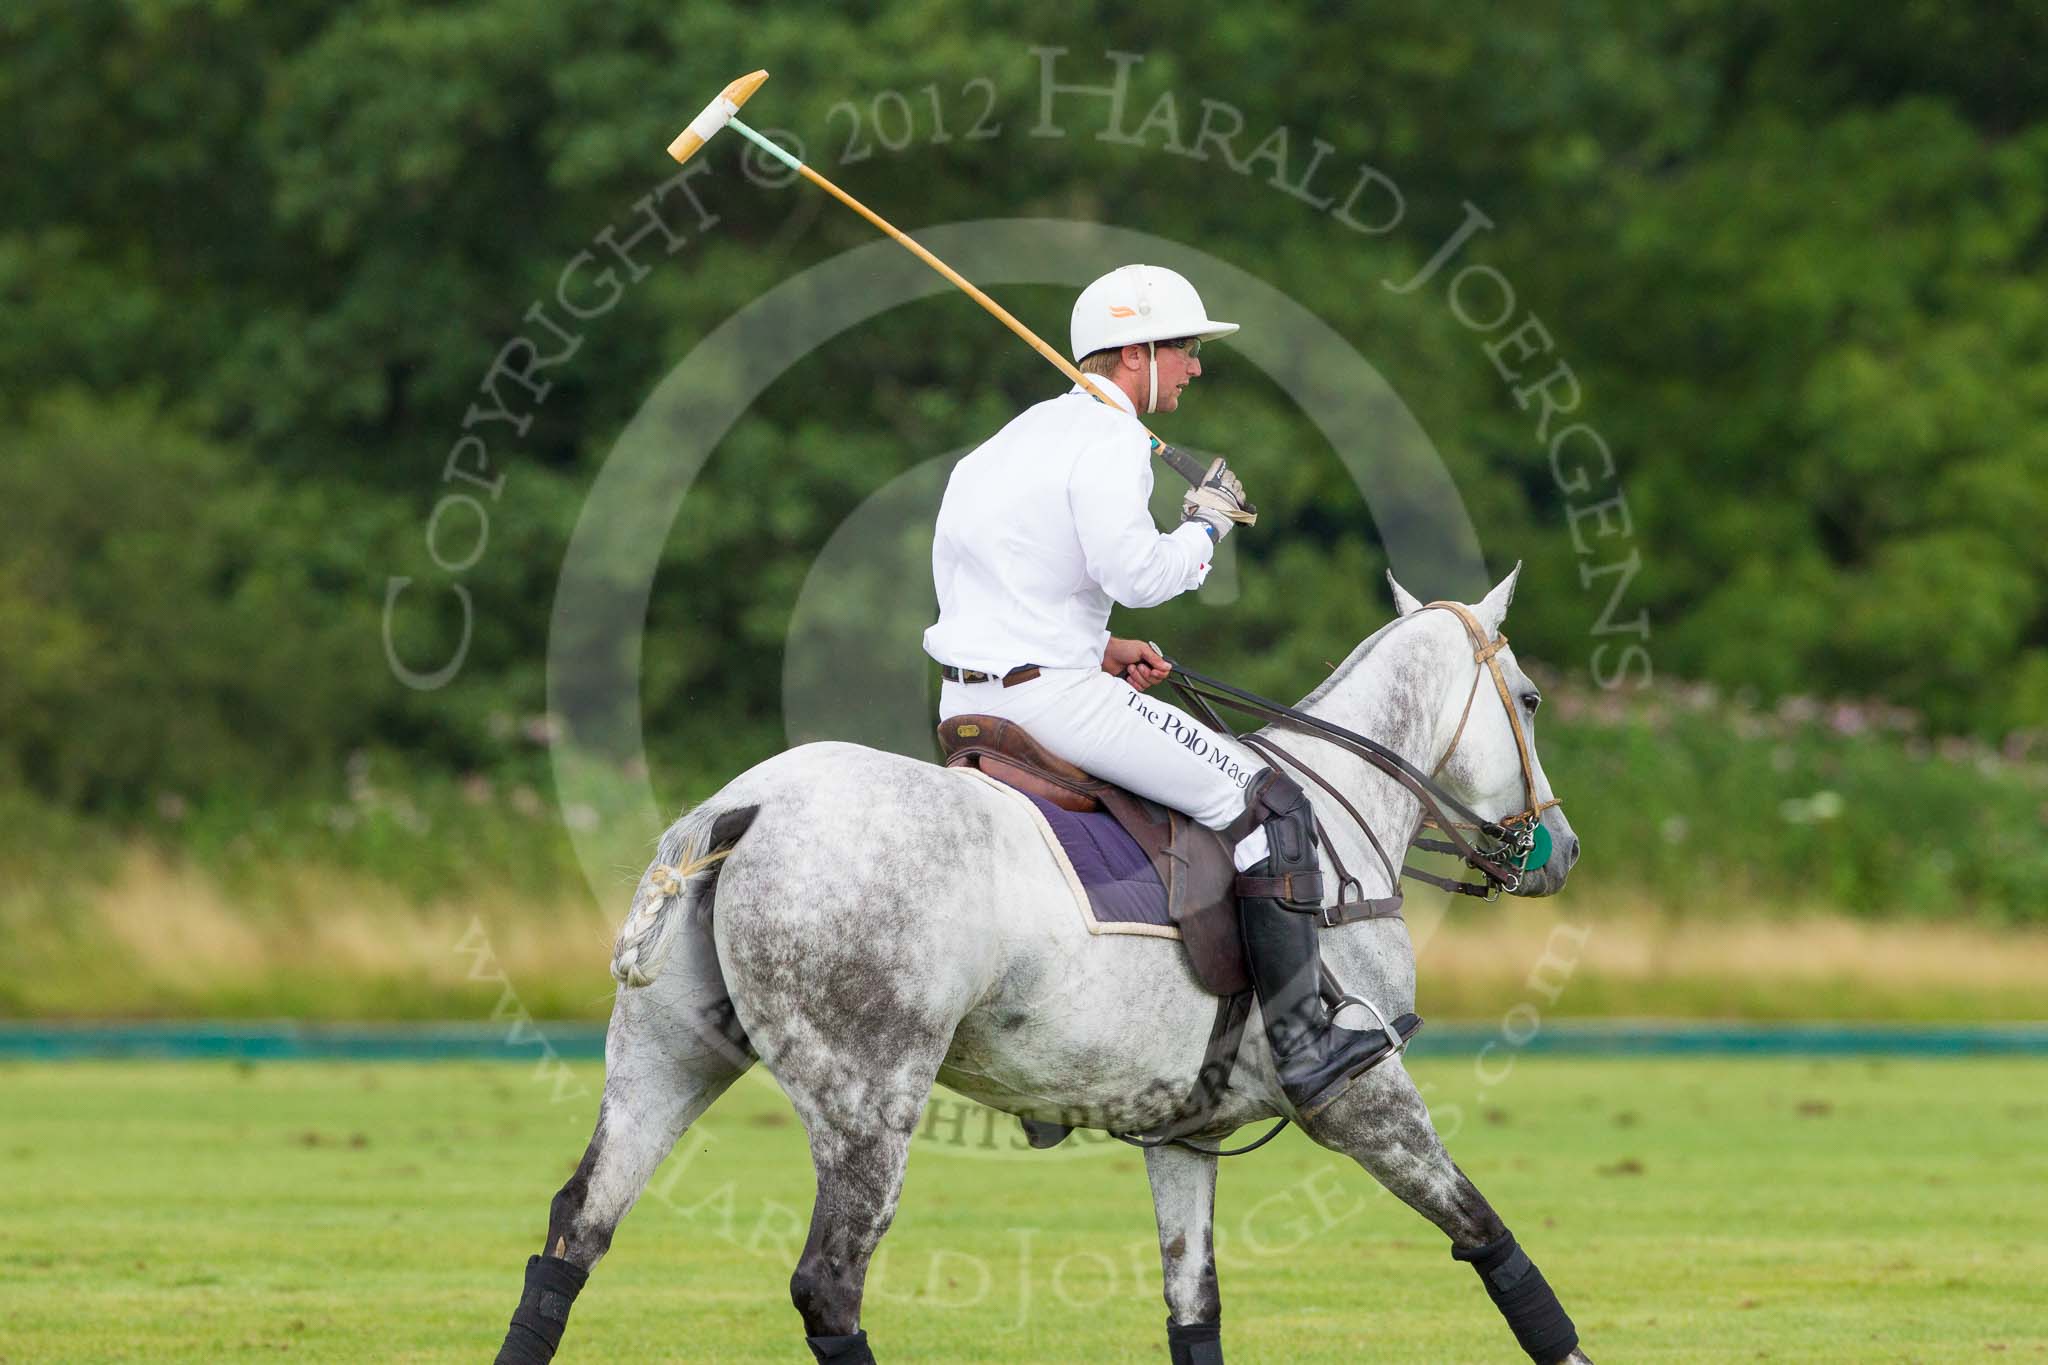 7th Heritage Polo Cup semi-finals: Pedro Harrison with his Best Playing Pony cantering back to centre..
Hurtwood Park Polo Club,
Ewhurst Green,
Surrey,
United Kingdom,
on 04 August 2012 at 15:45, image #274